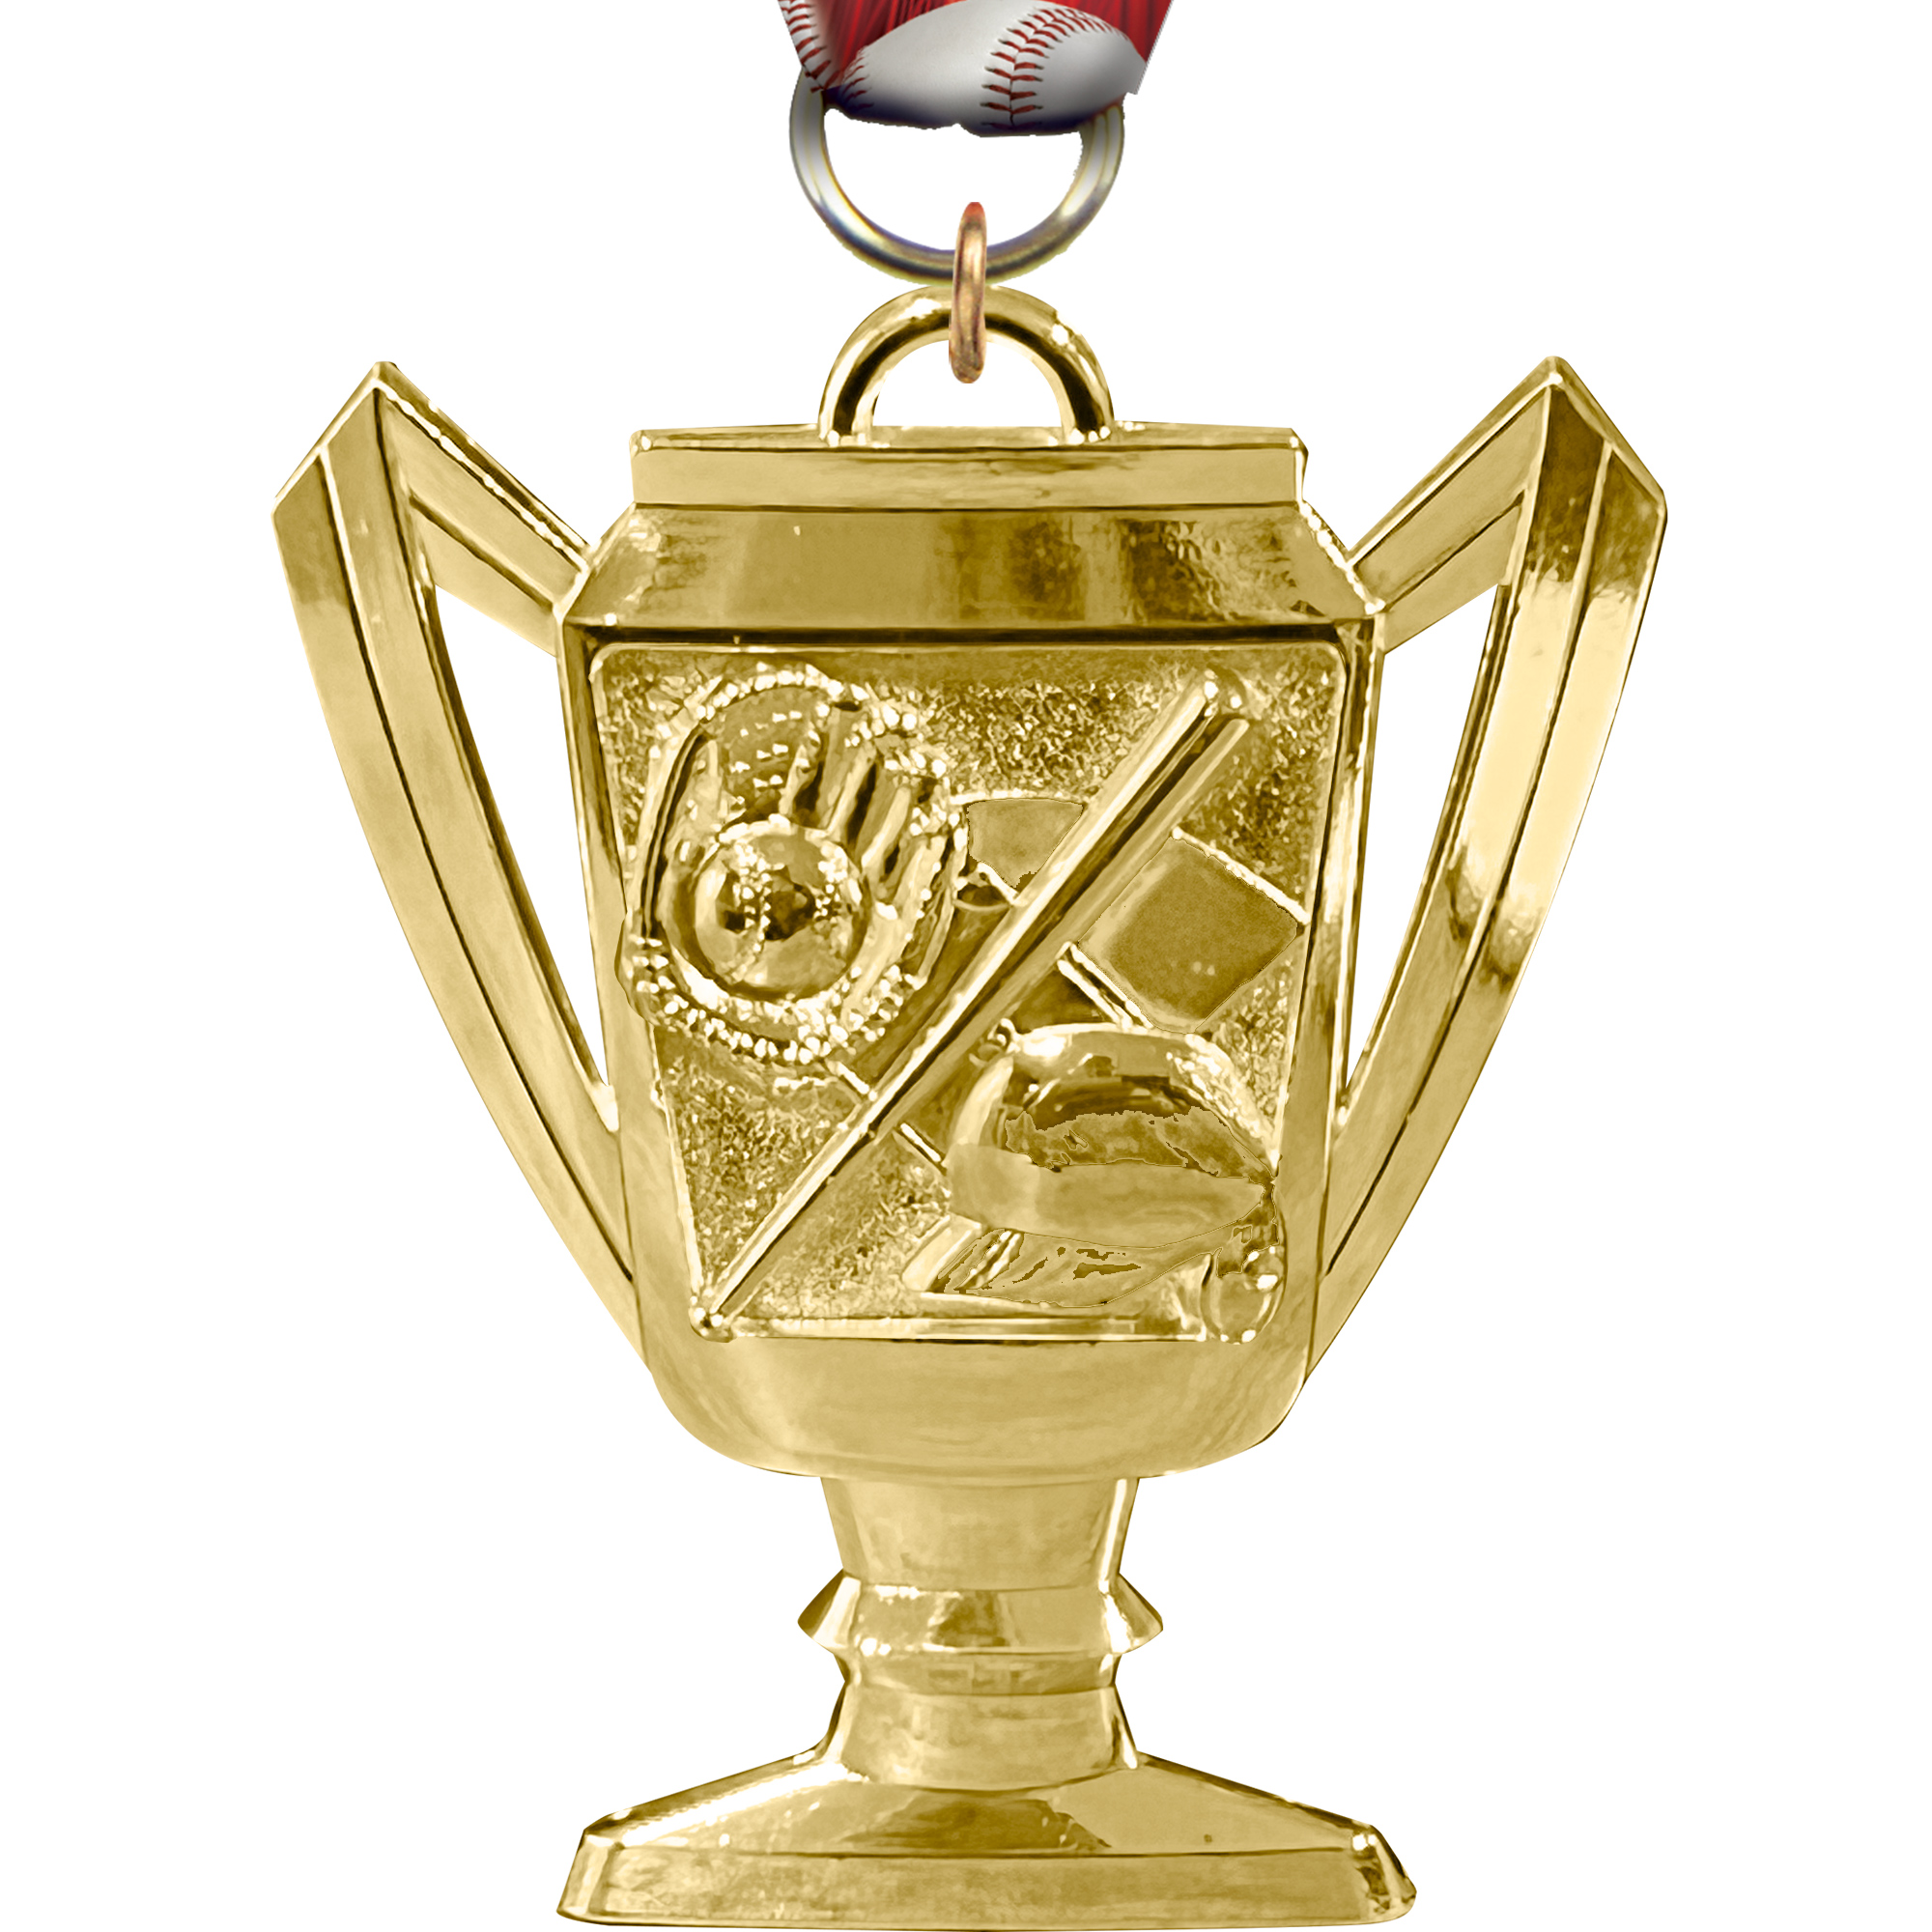 Baseball Bright Gold Trophy Cup Medal